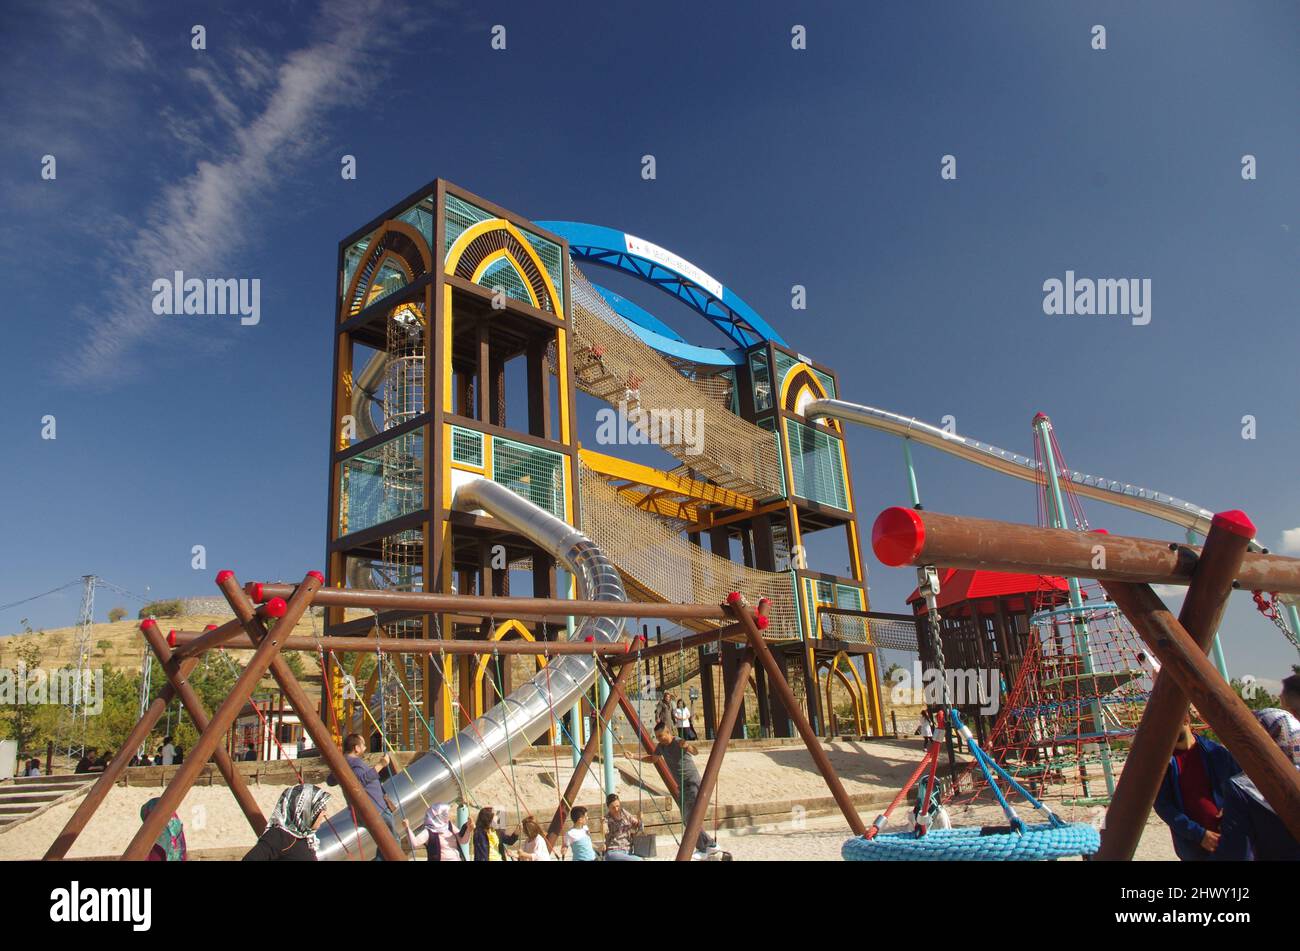 Sille Park is the one of most attractive place in Konya City. Huge playground for children. Colourful playground with slides and swings. Stock Photo